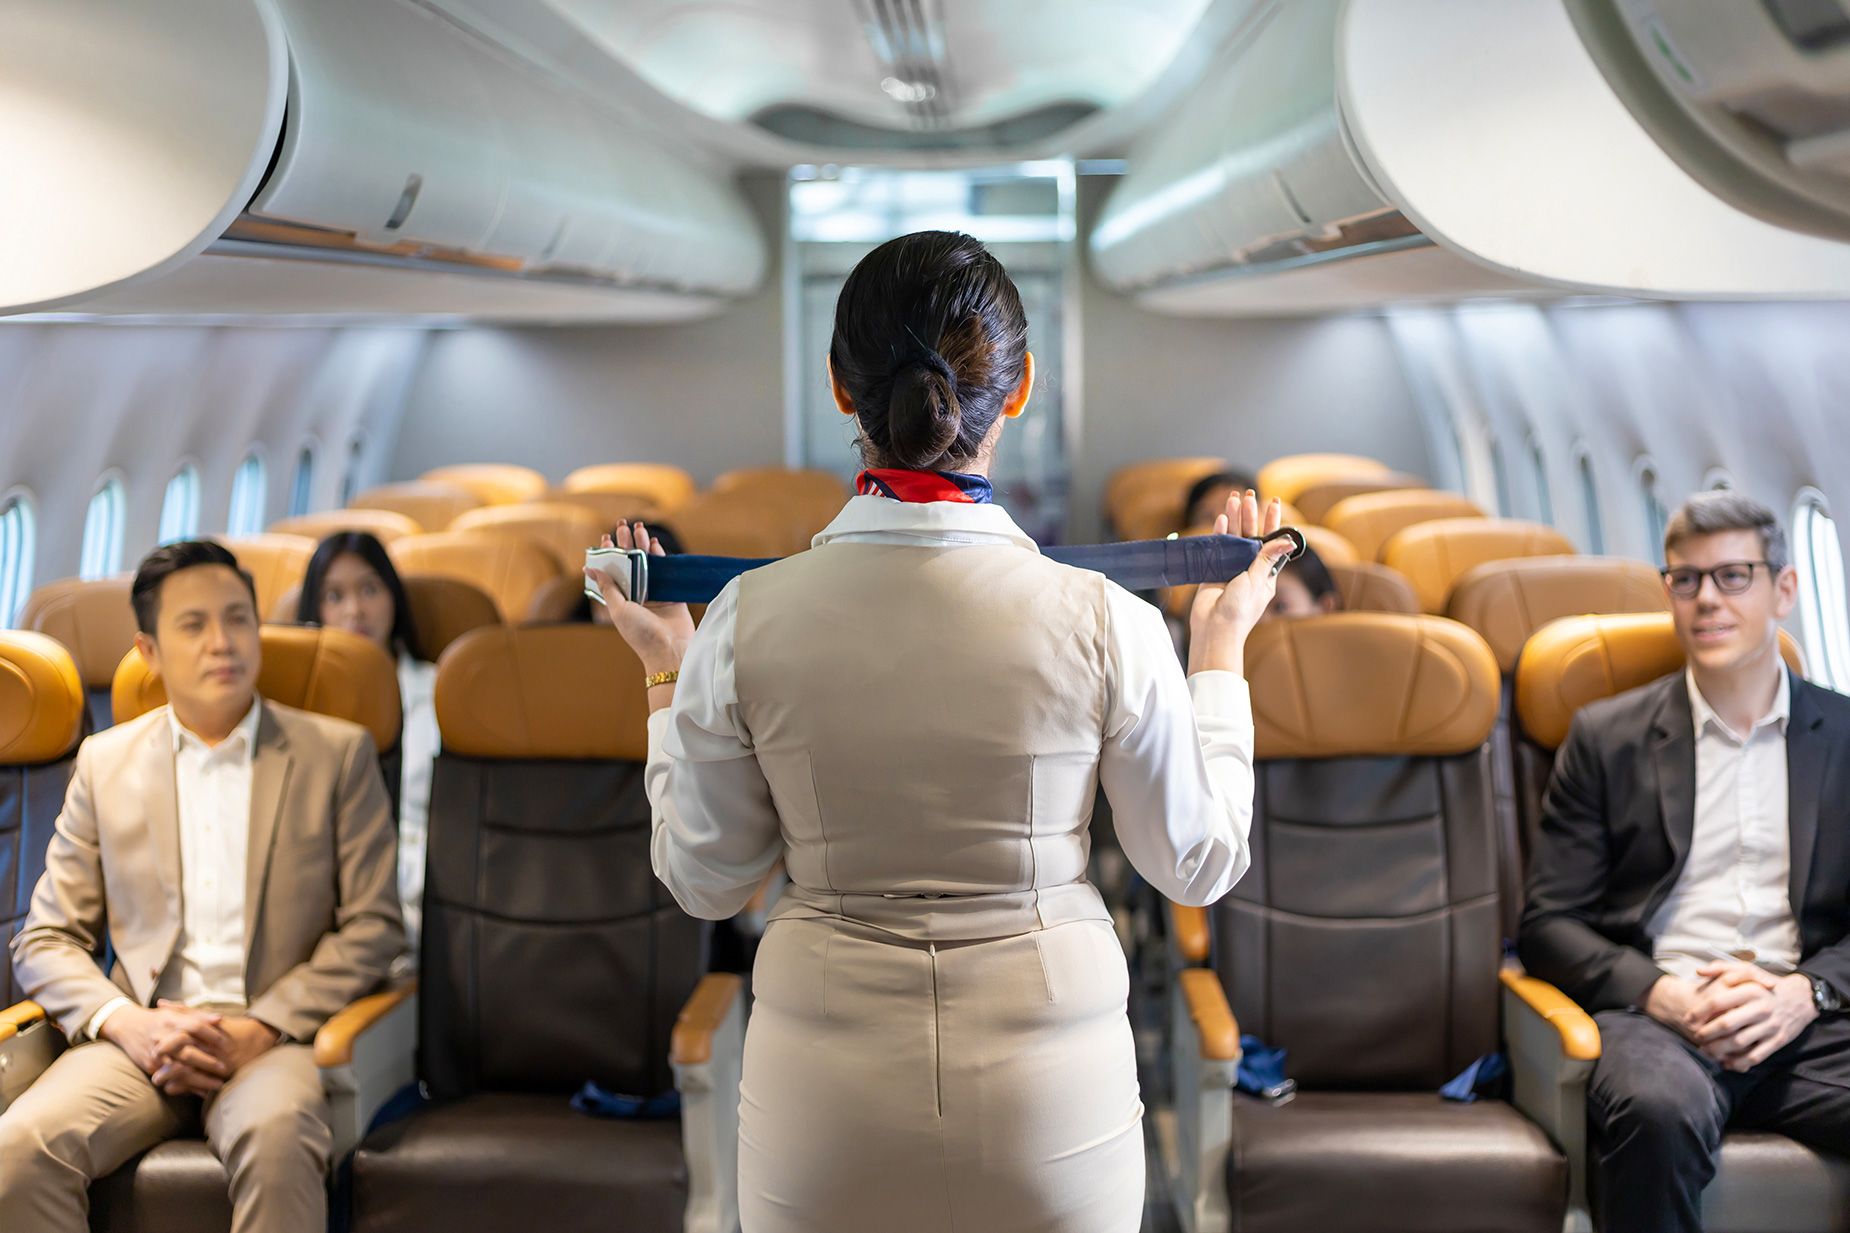 You are barrelling about the skies at 500 miles an hour.' Why flight  attendants want you to stop ignoring them